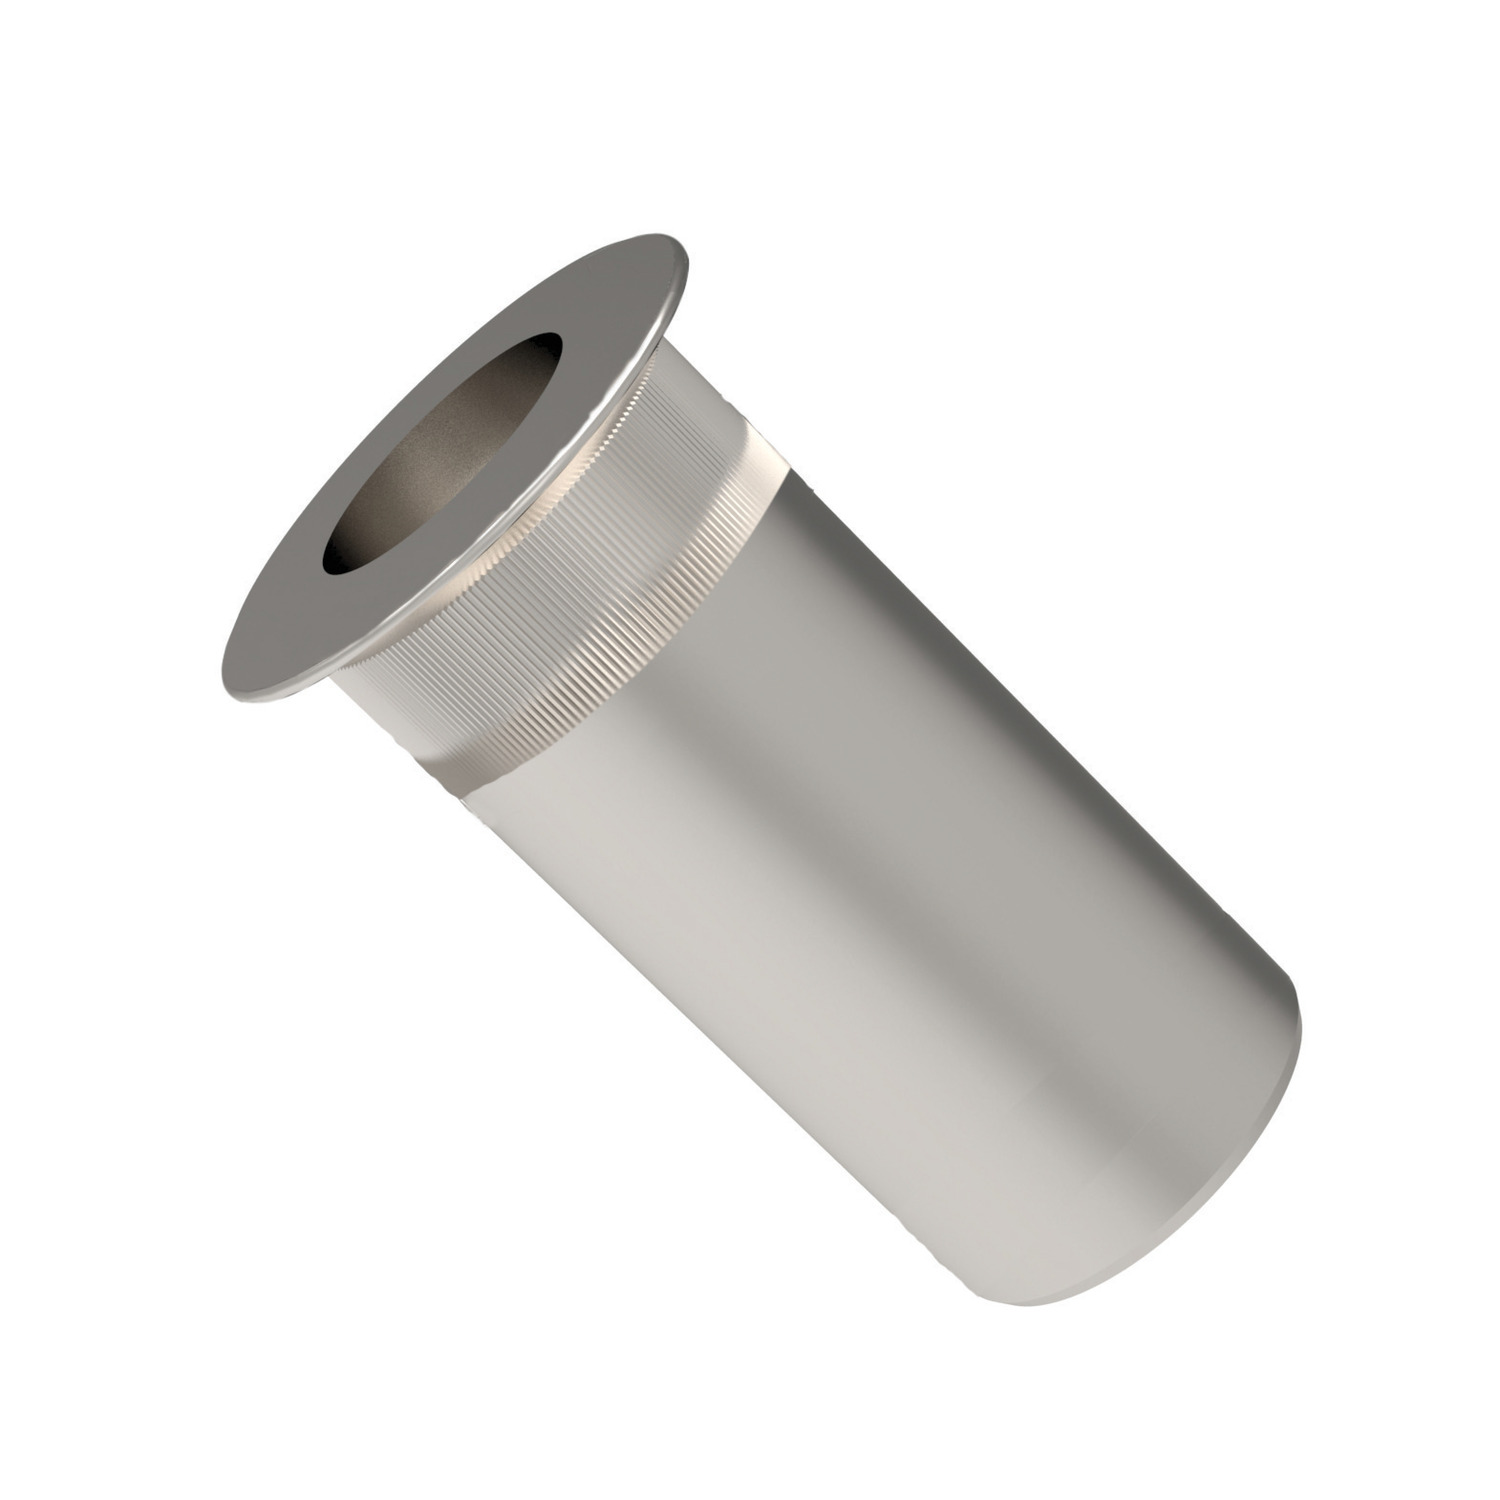 P0820.A2 Flange Head Knurled Insert Nuts